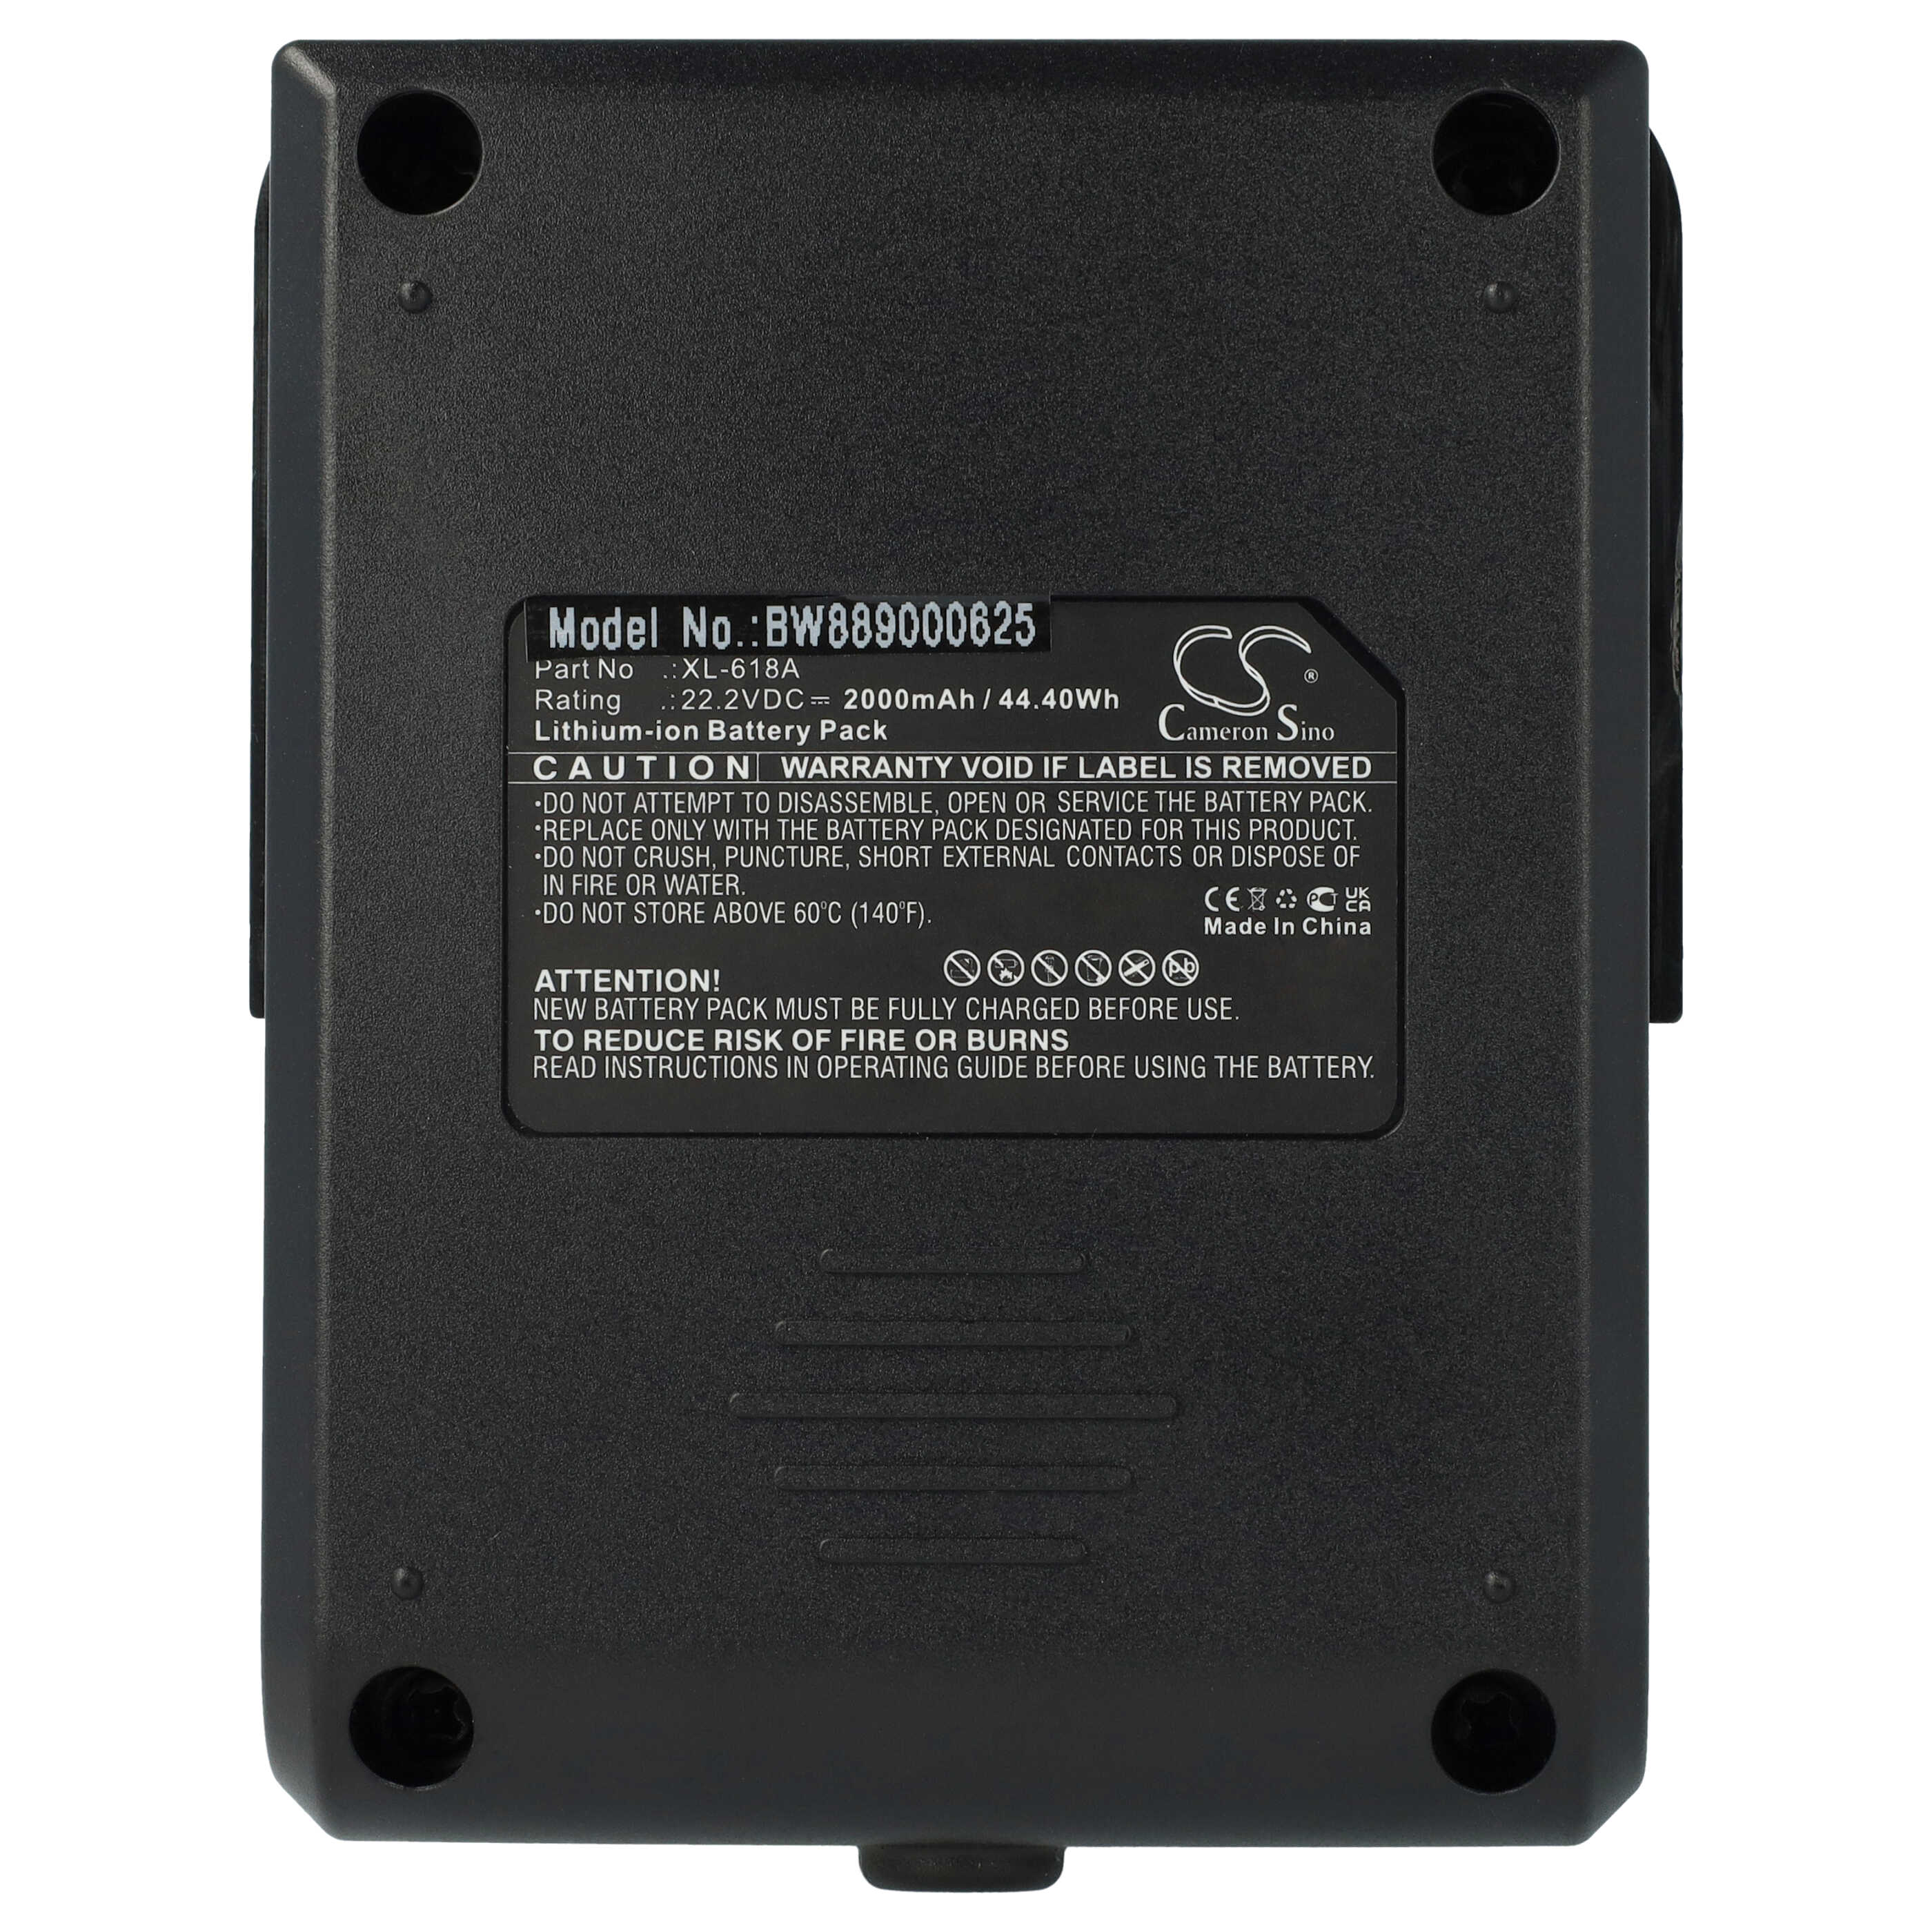 Battery Replacement for Moosoo XL-618A for - 2000mAh, 22.2V, Li-Ion